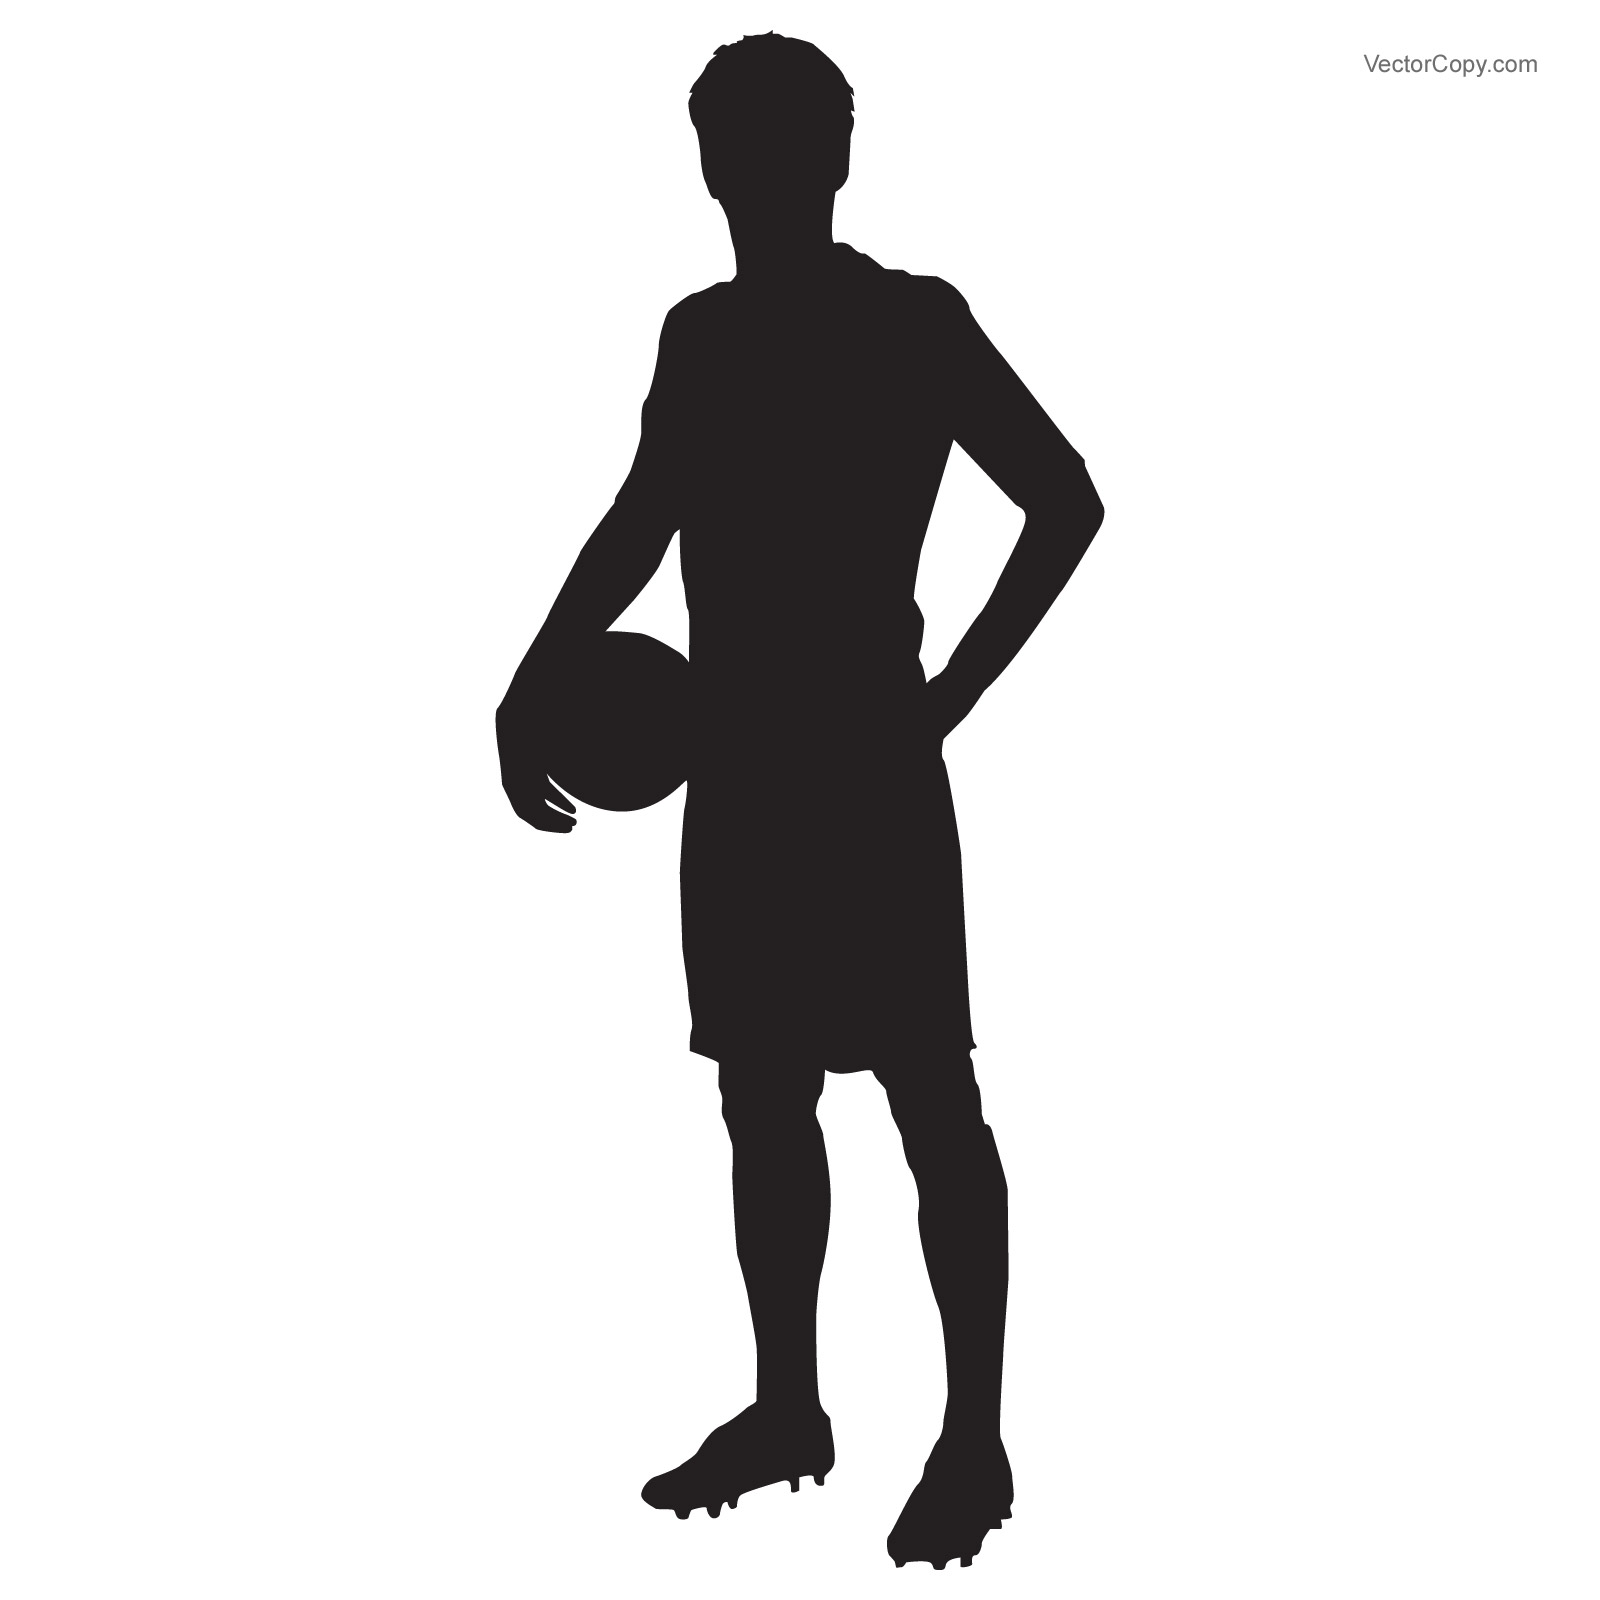 Football Player Silhouette Vector